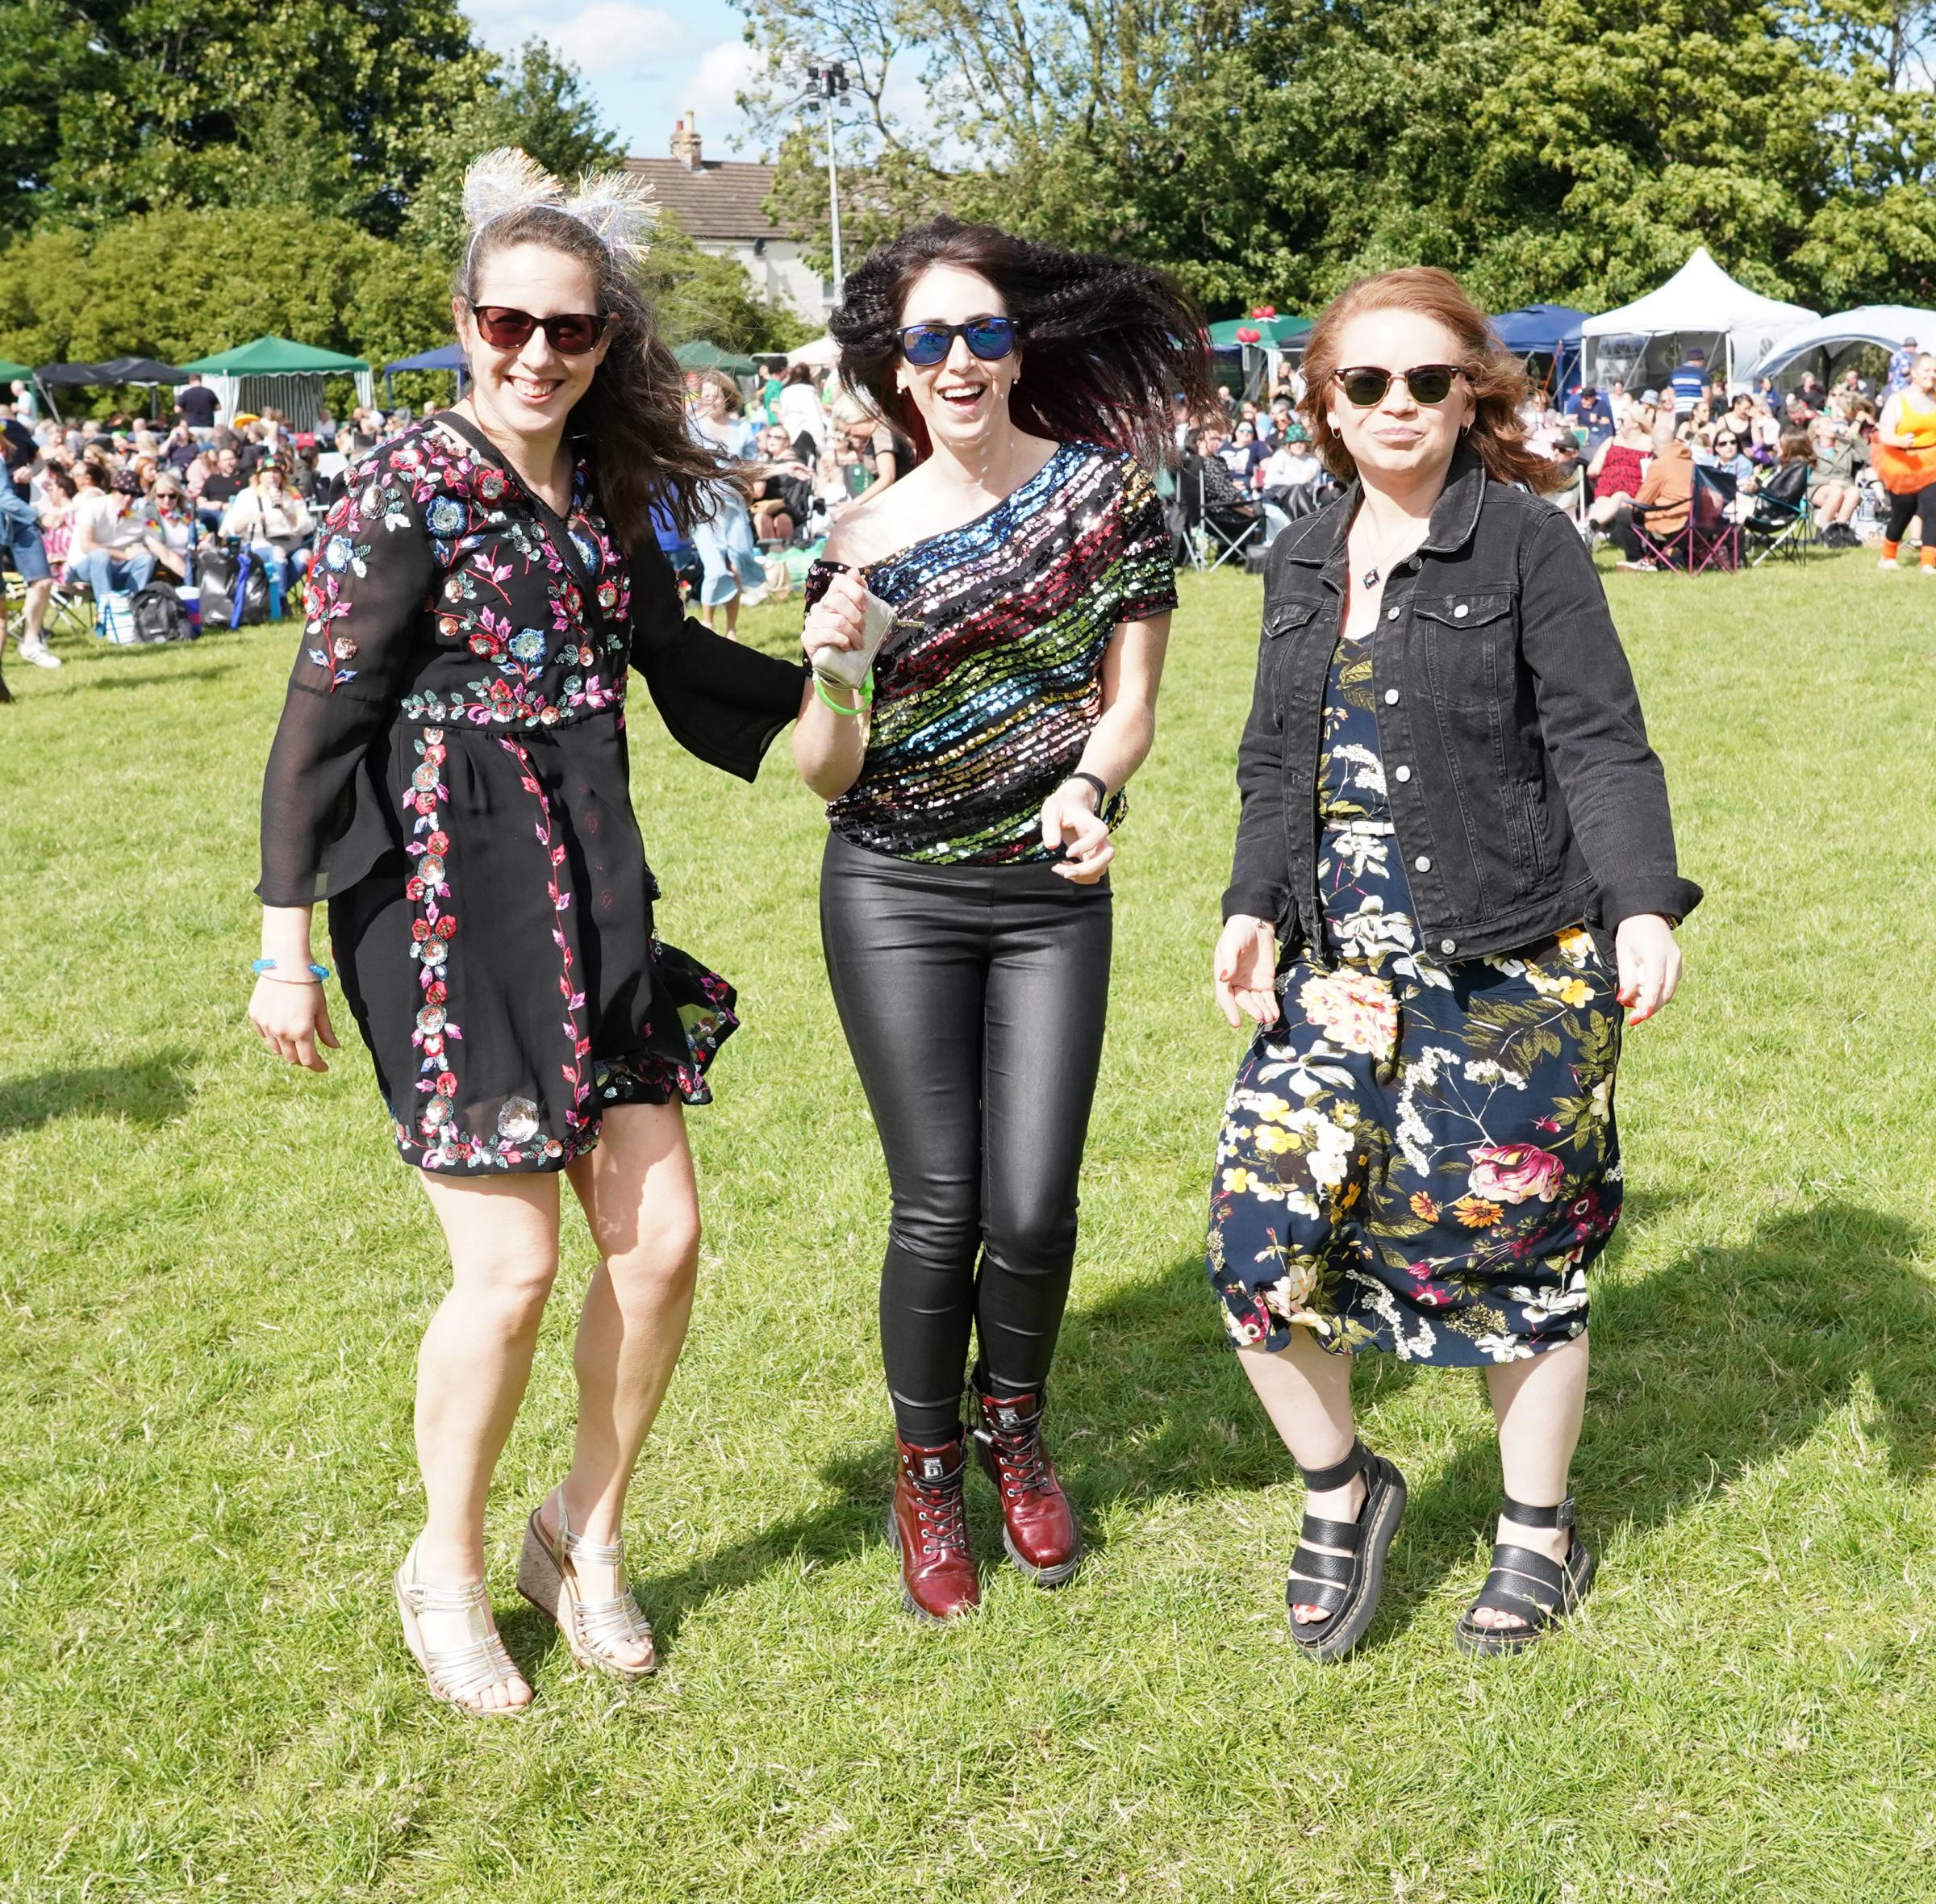 The Summer Sounds Music Festival in Guisborough on Saturday Picture: BRIAN GLEESON